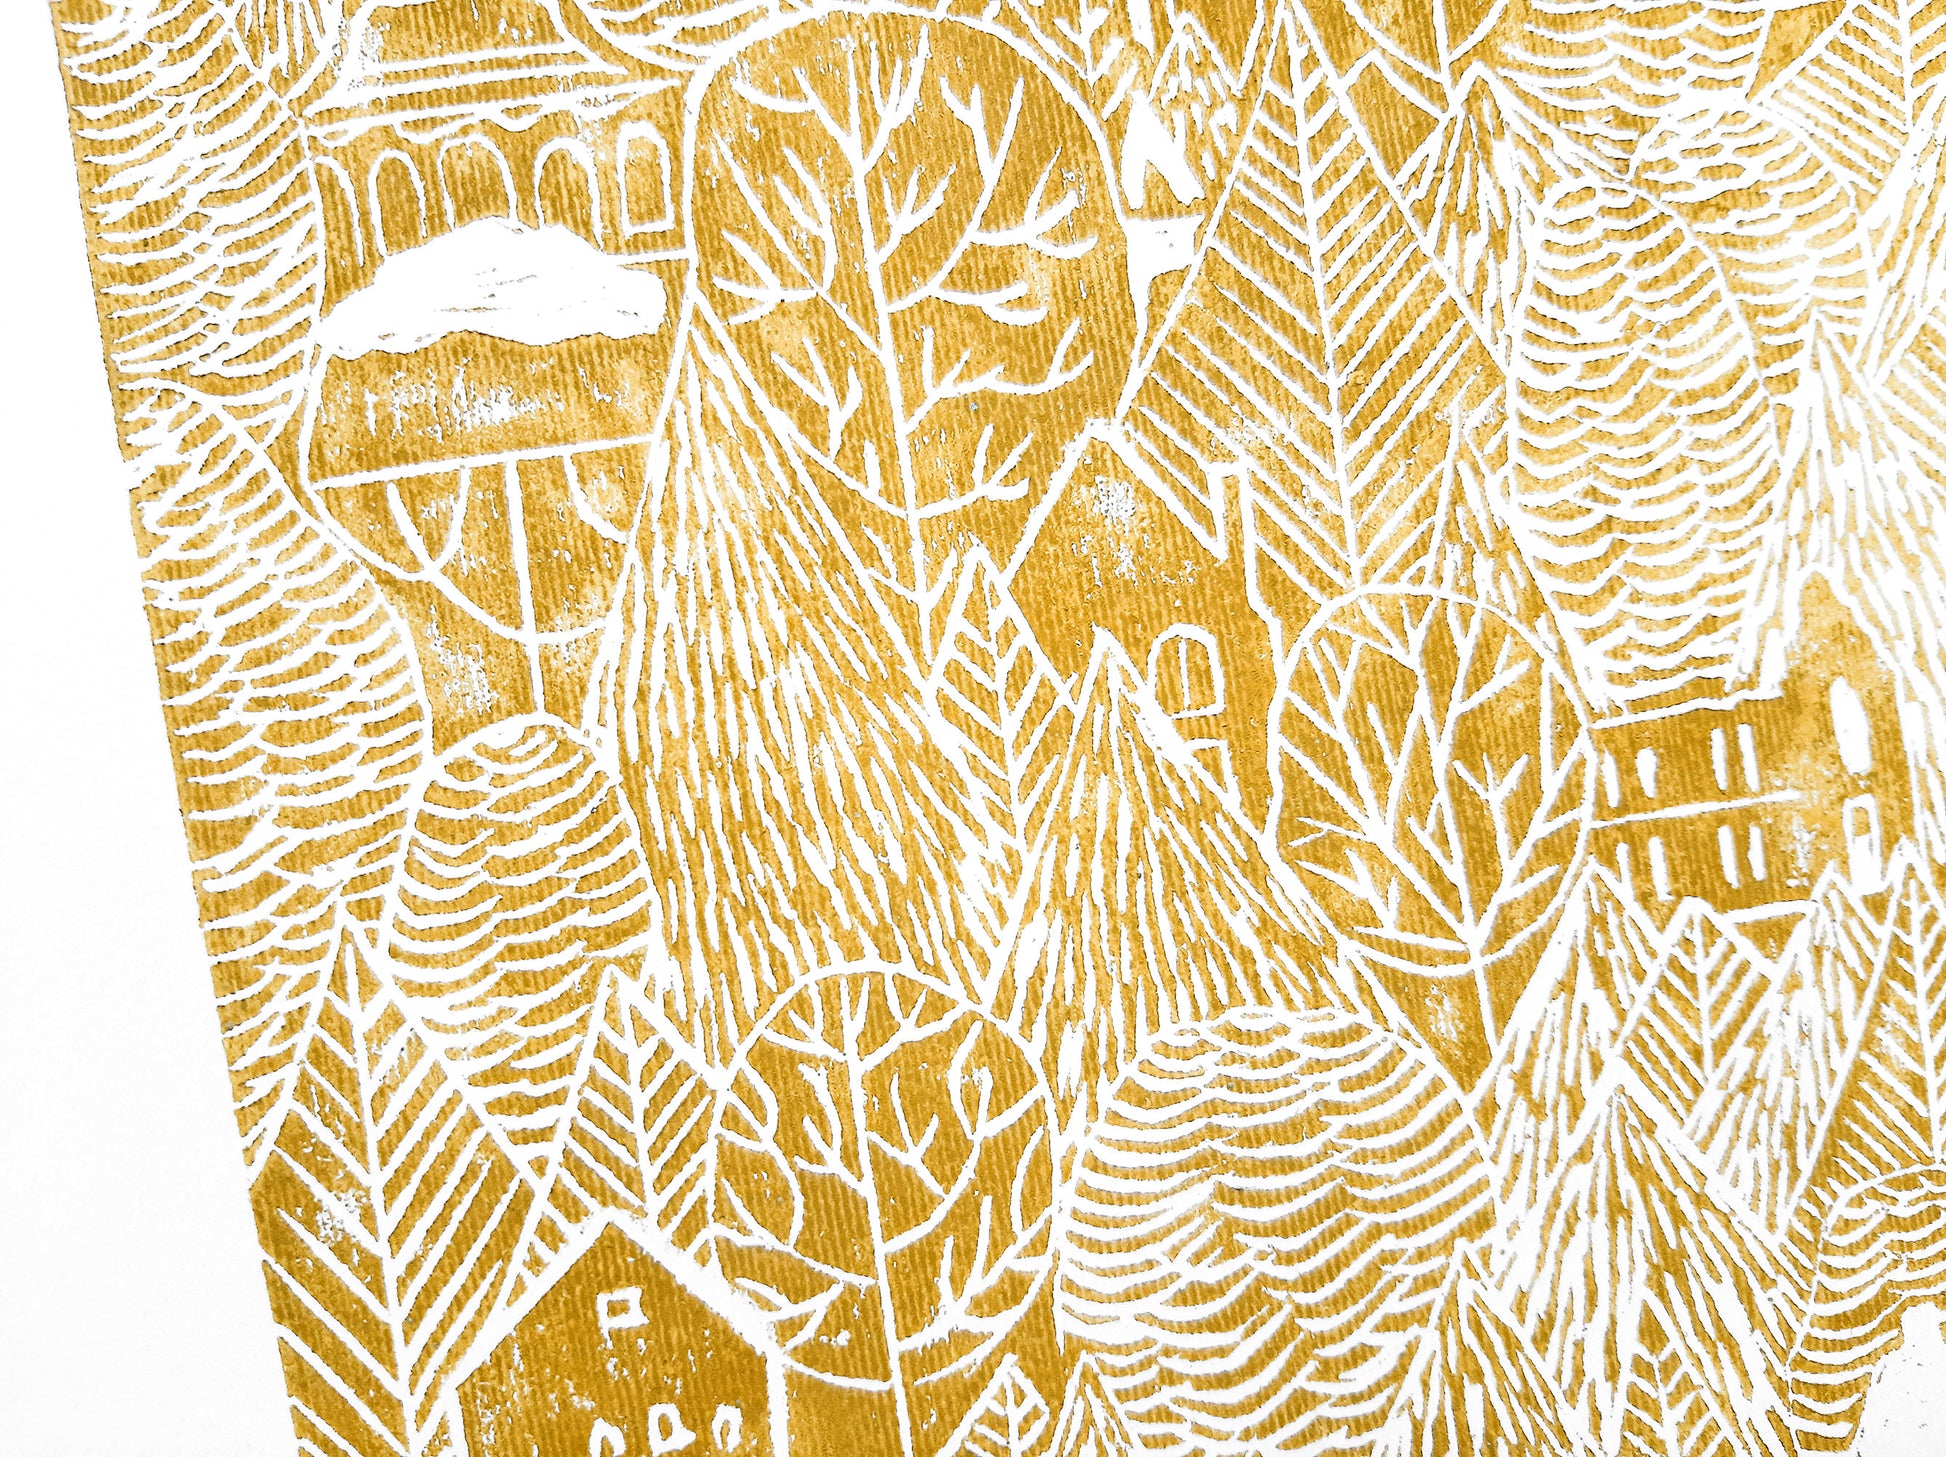 Linocut print Ochre forest with houses Original artwork 12x16 for New home gift and bedroom wall decor UNFRAMED, Linogravure, Living room wall art, Farmhouse wall decor, block print, New home gift, bedroom wall decor, lino print, handmade print art, printmaking